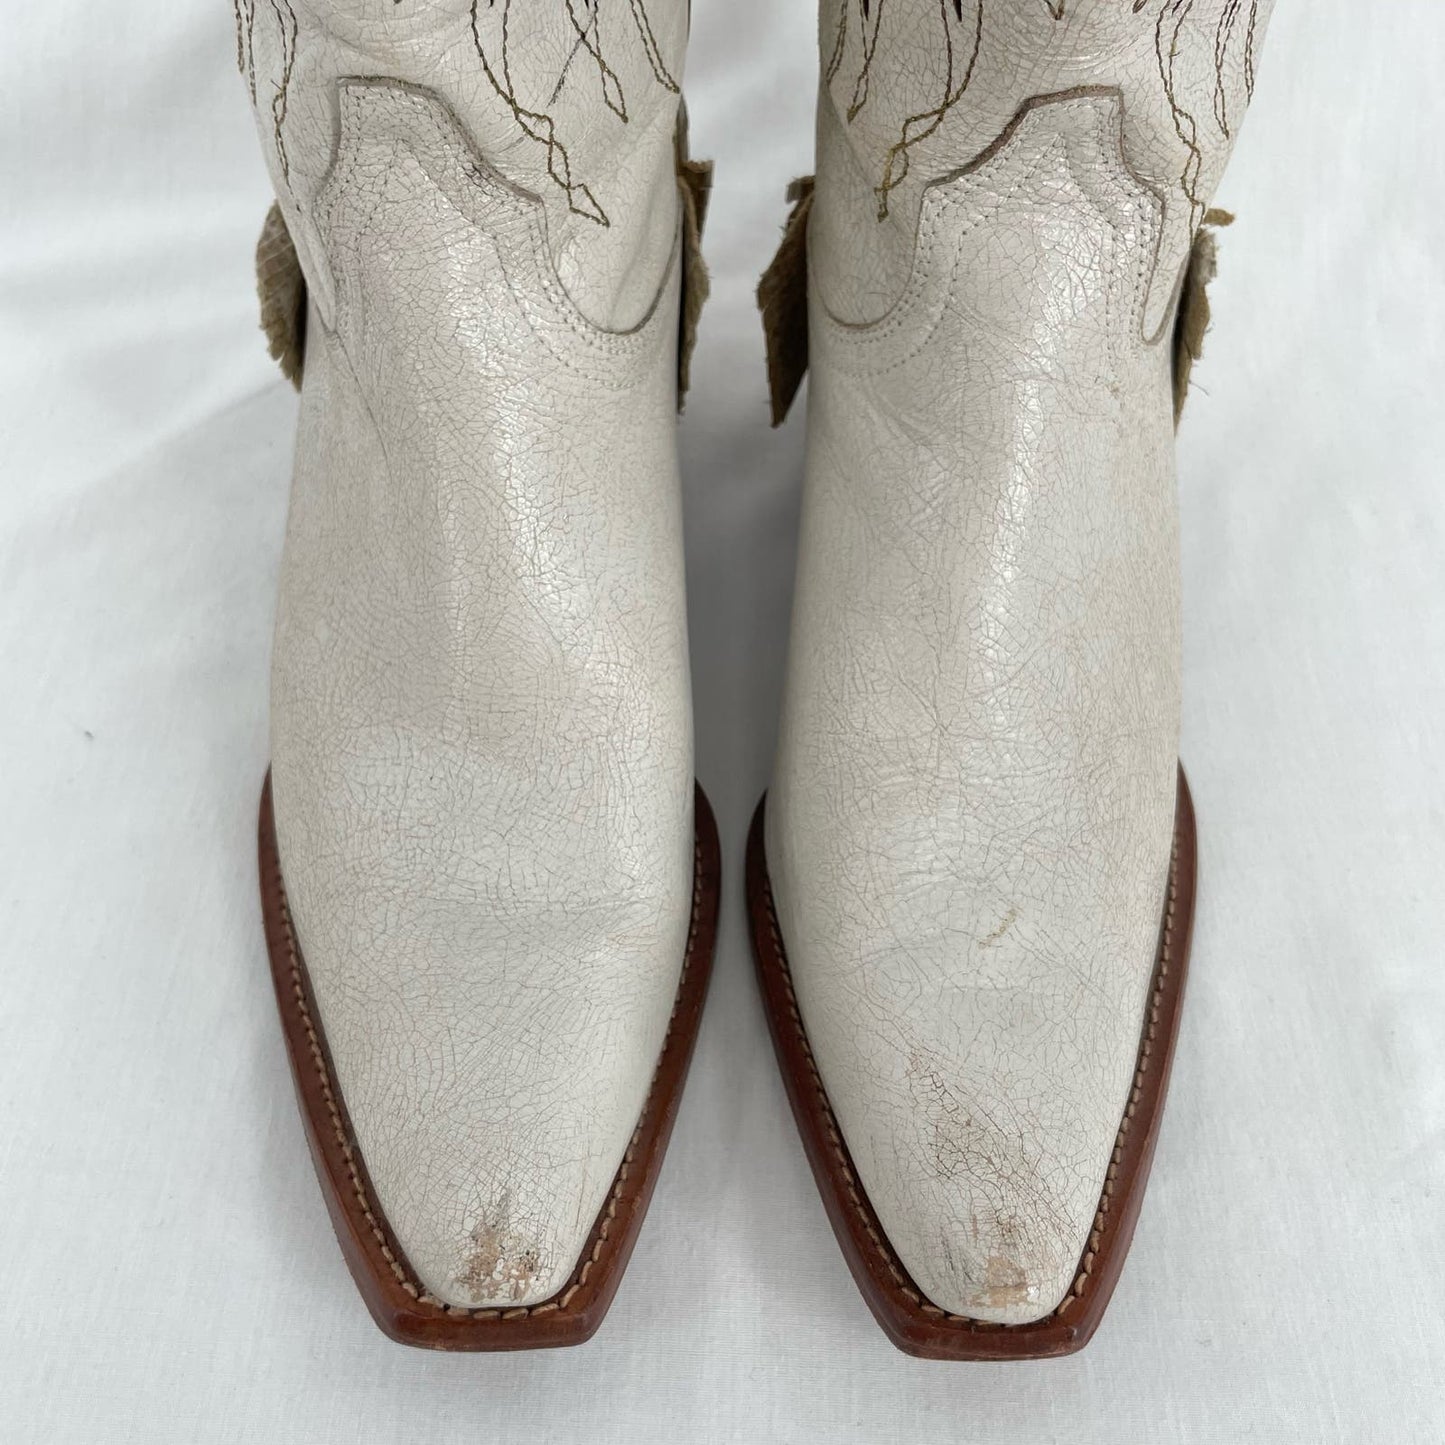 Lucchese x Kacey Musgraves Golden Arrow White Leather Cowboy Boots RARE Size 9.5